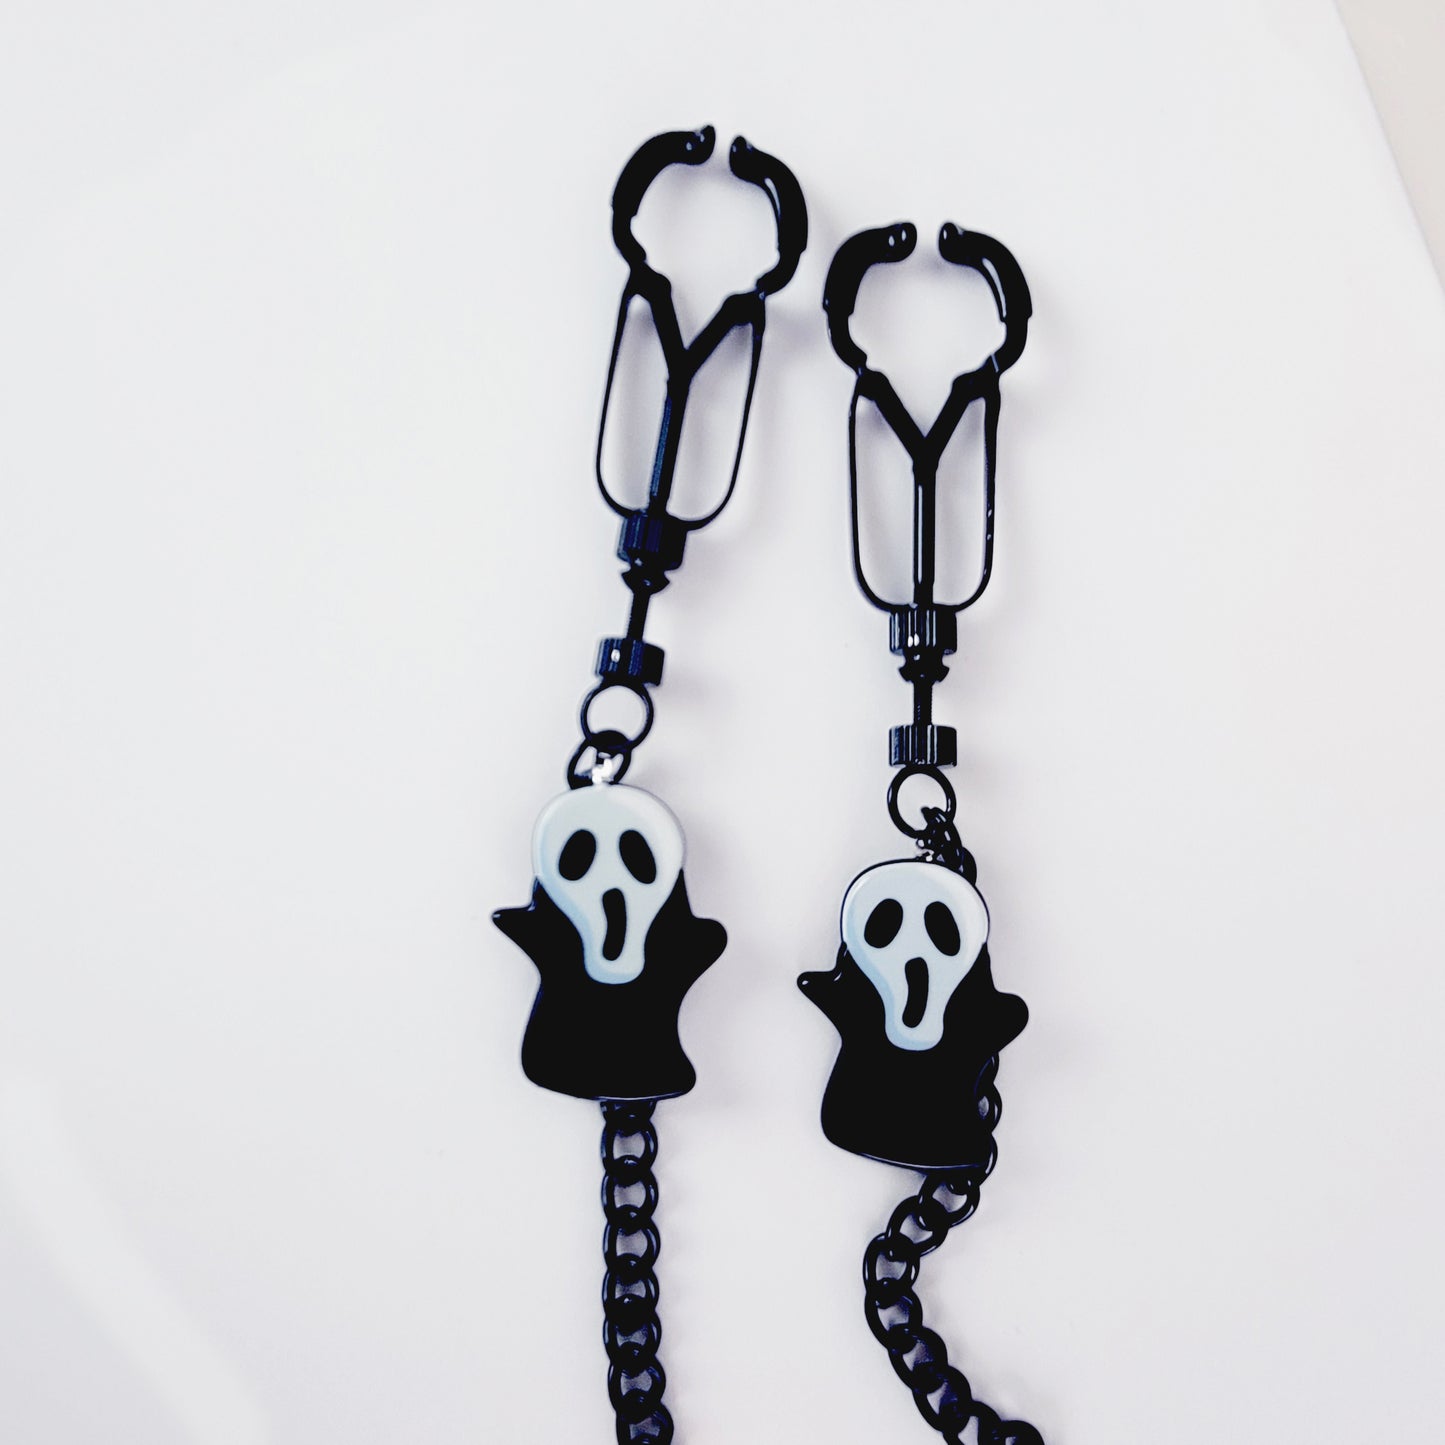 Black Nipple Clamps with Chain attached and Halloween Pendants. Black Beetle Clamps. BDSM, MATURE